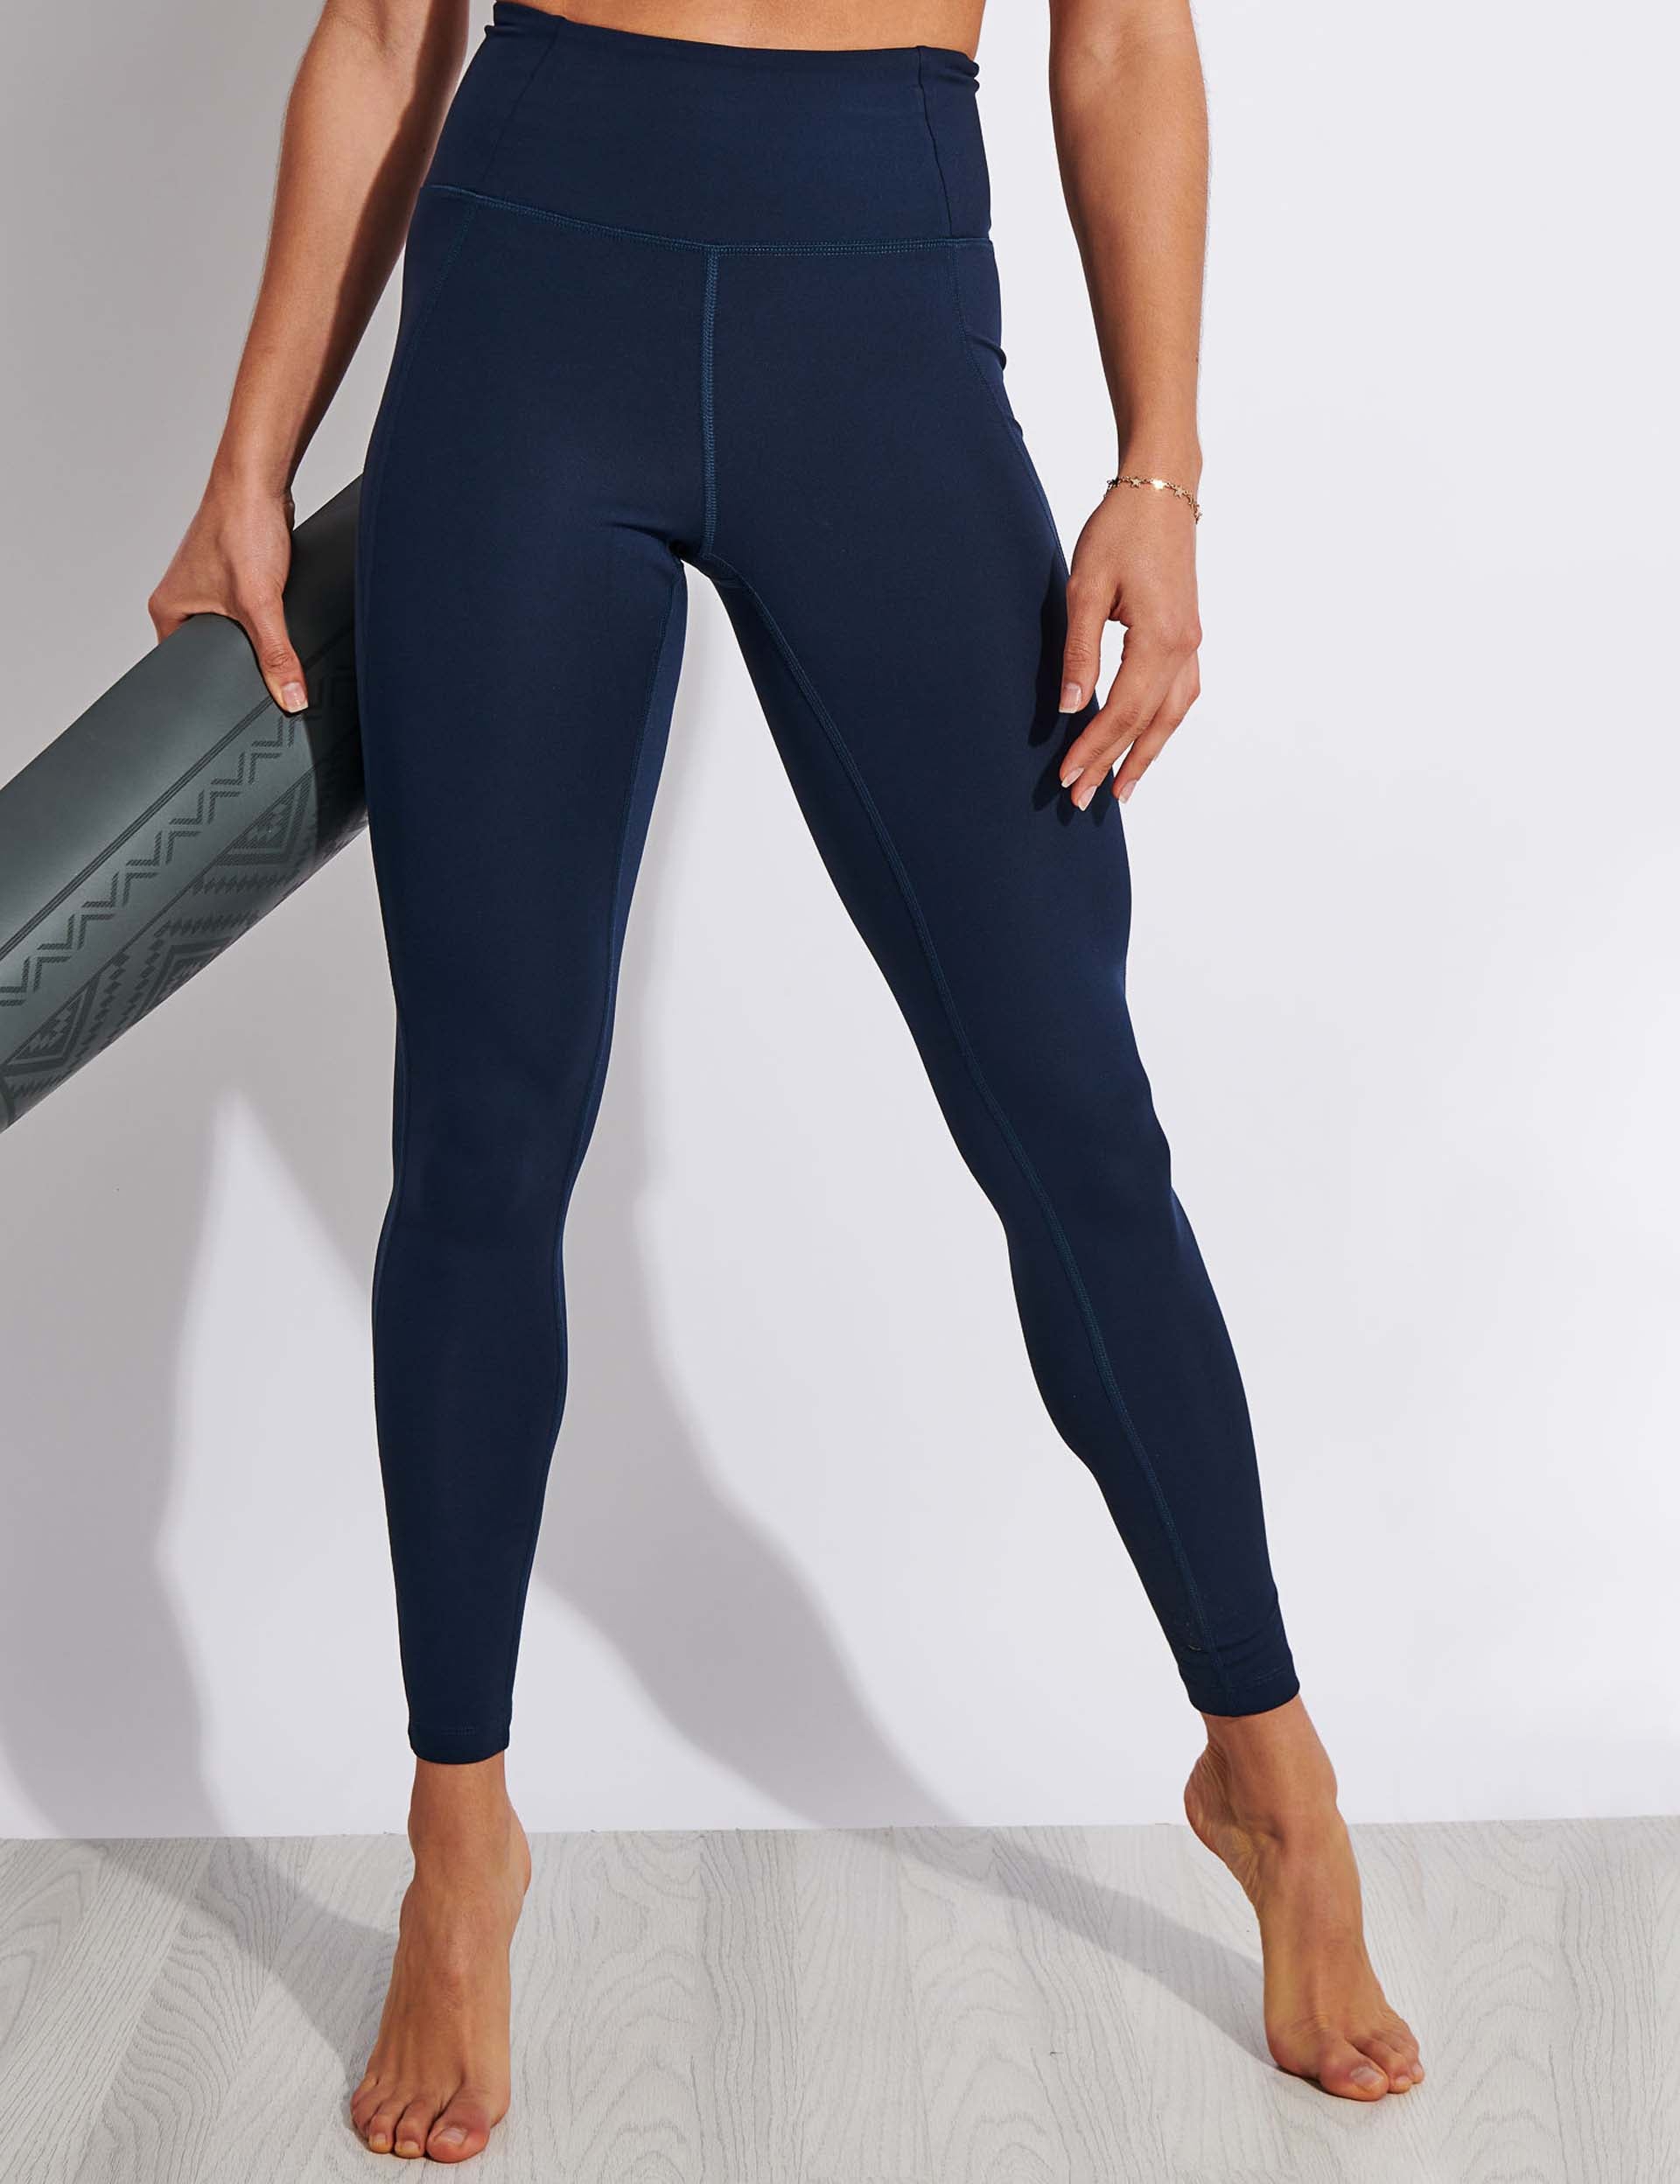 Girlfriend Collective Midnight Compressive High-Rise Legging Navy Blue Size  Larg